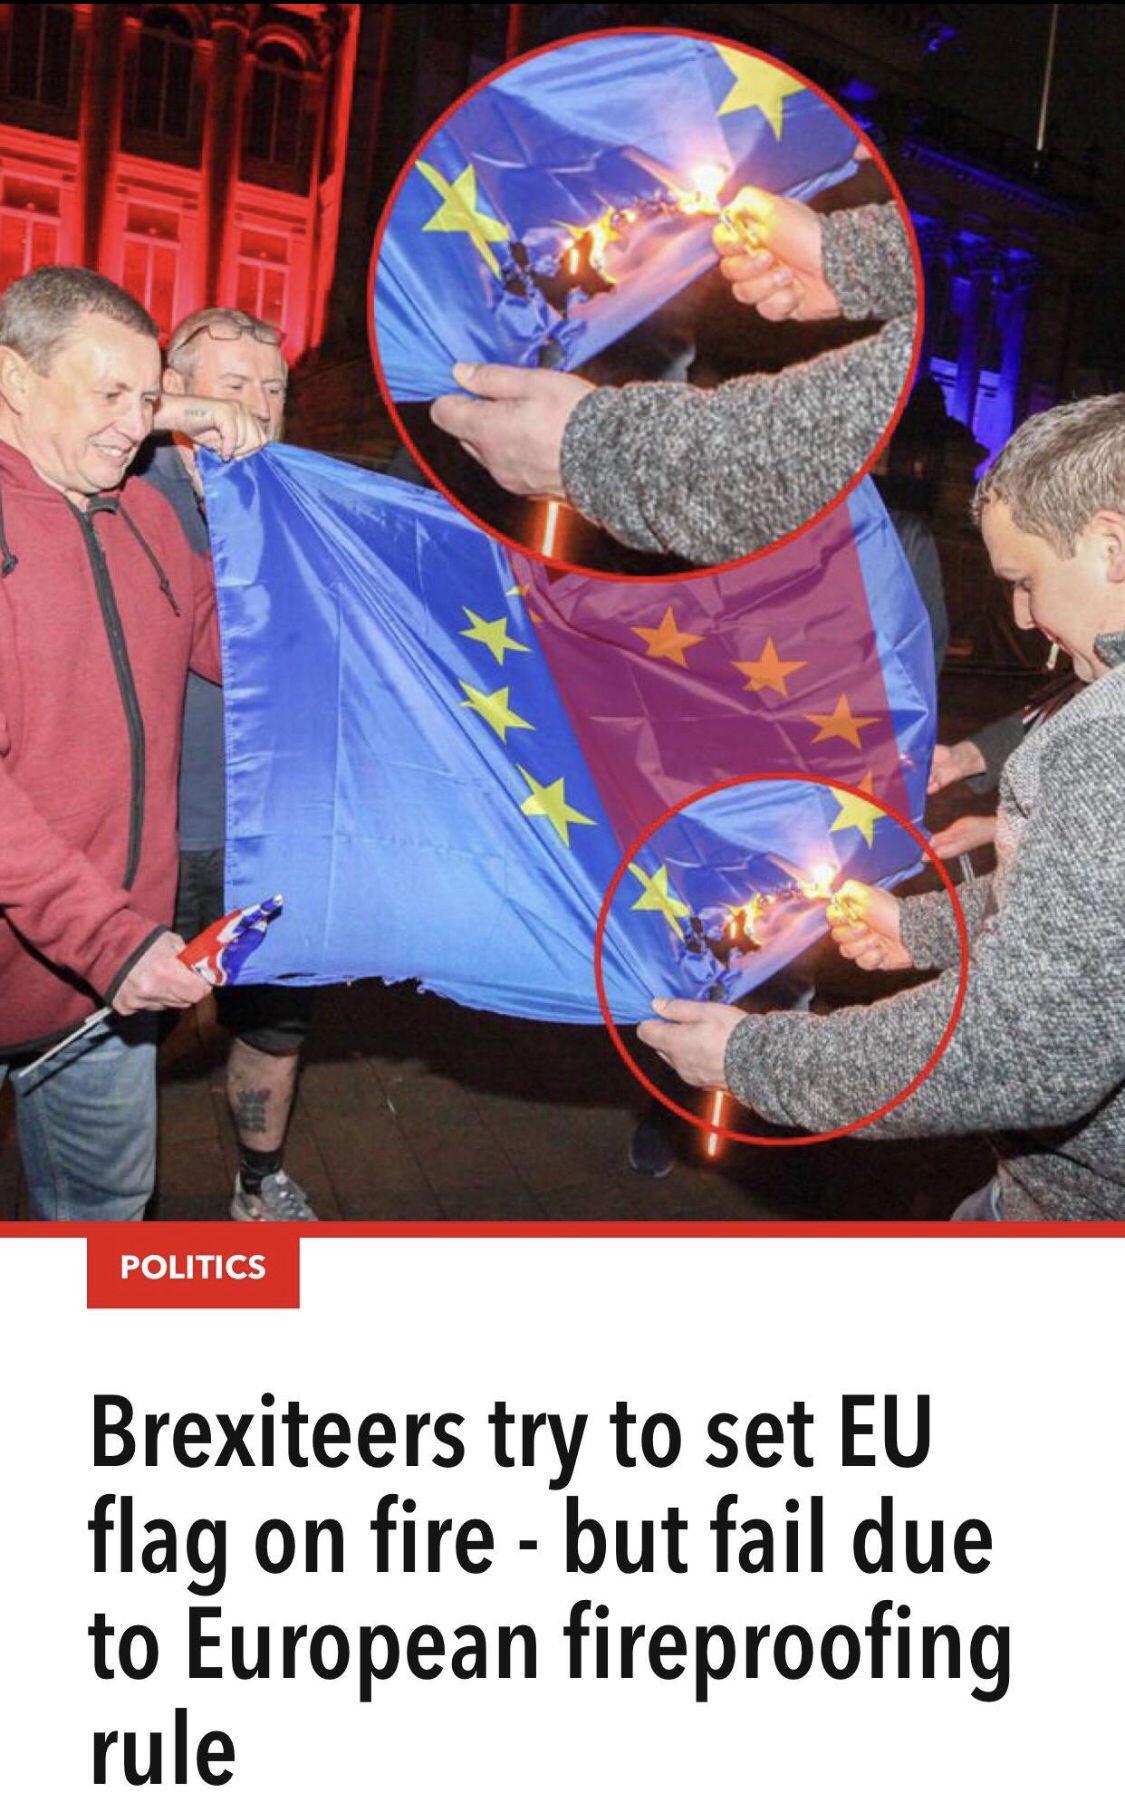 andalucia se mueve con europa - Politics Brexiteers try to set Eu flag on fire but fail due to European fireproofing rule